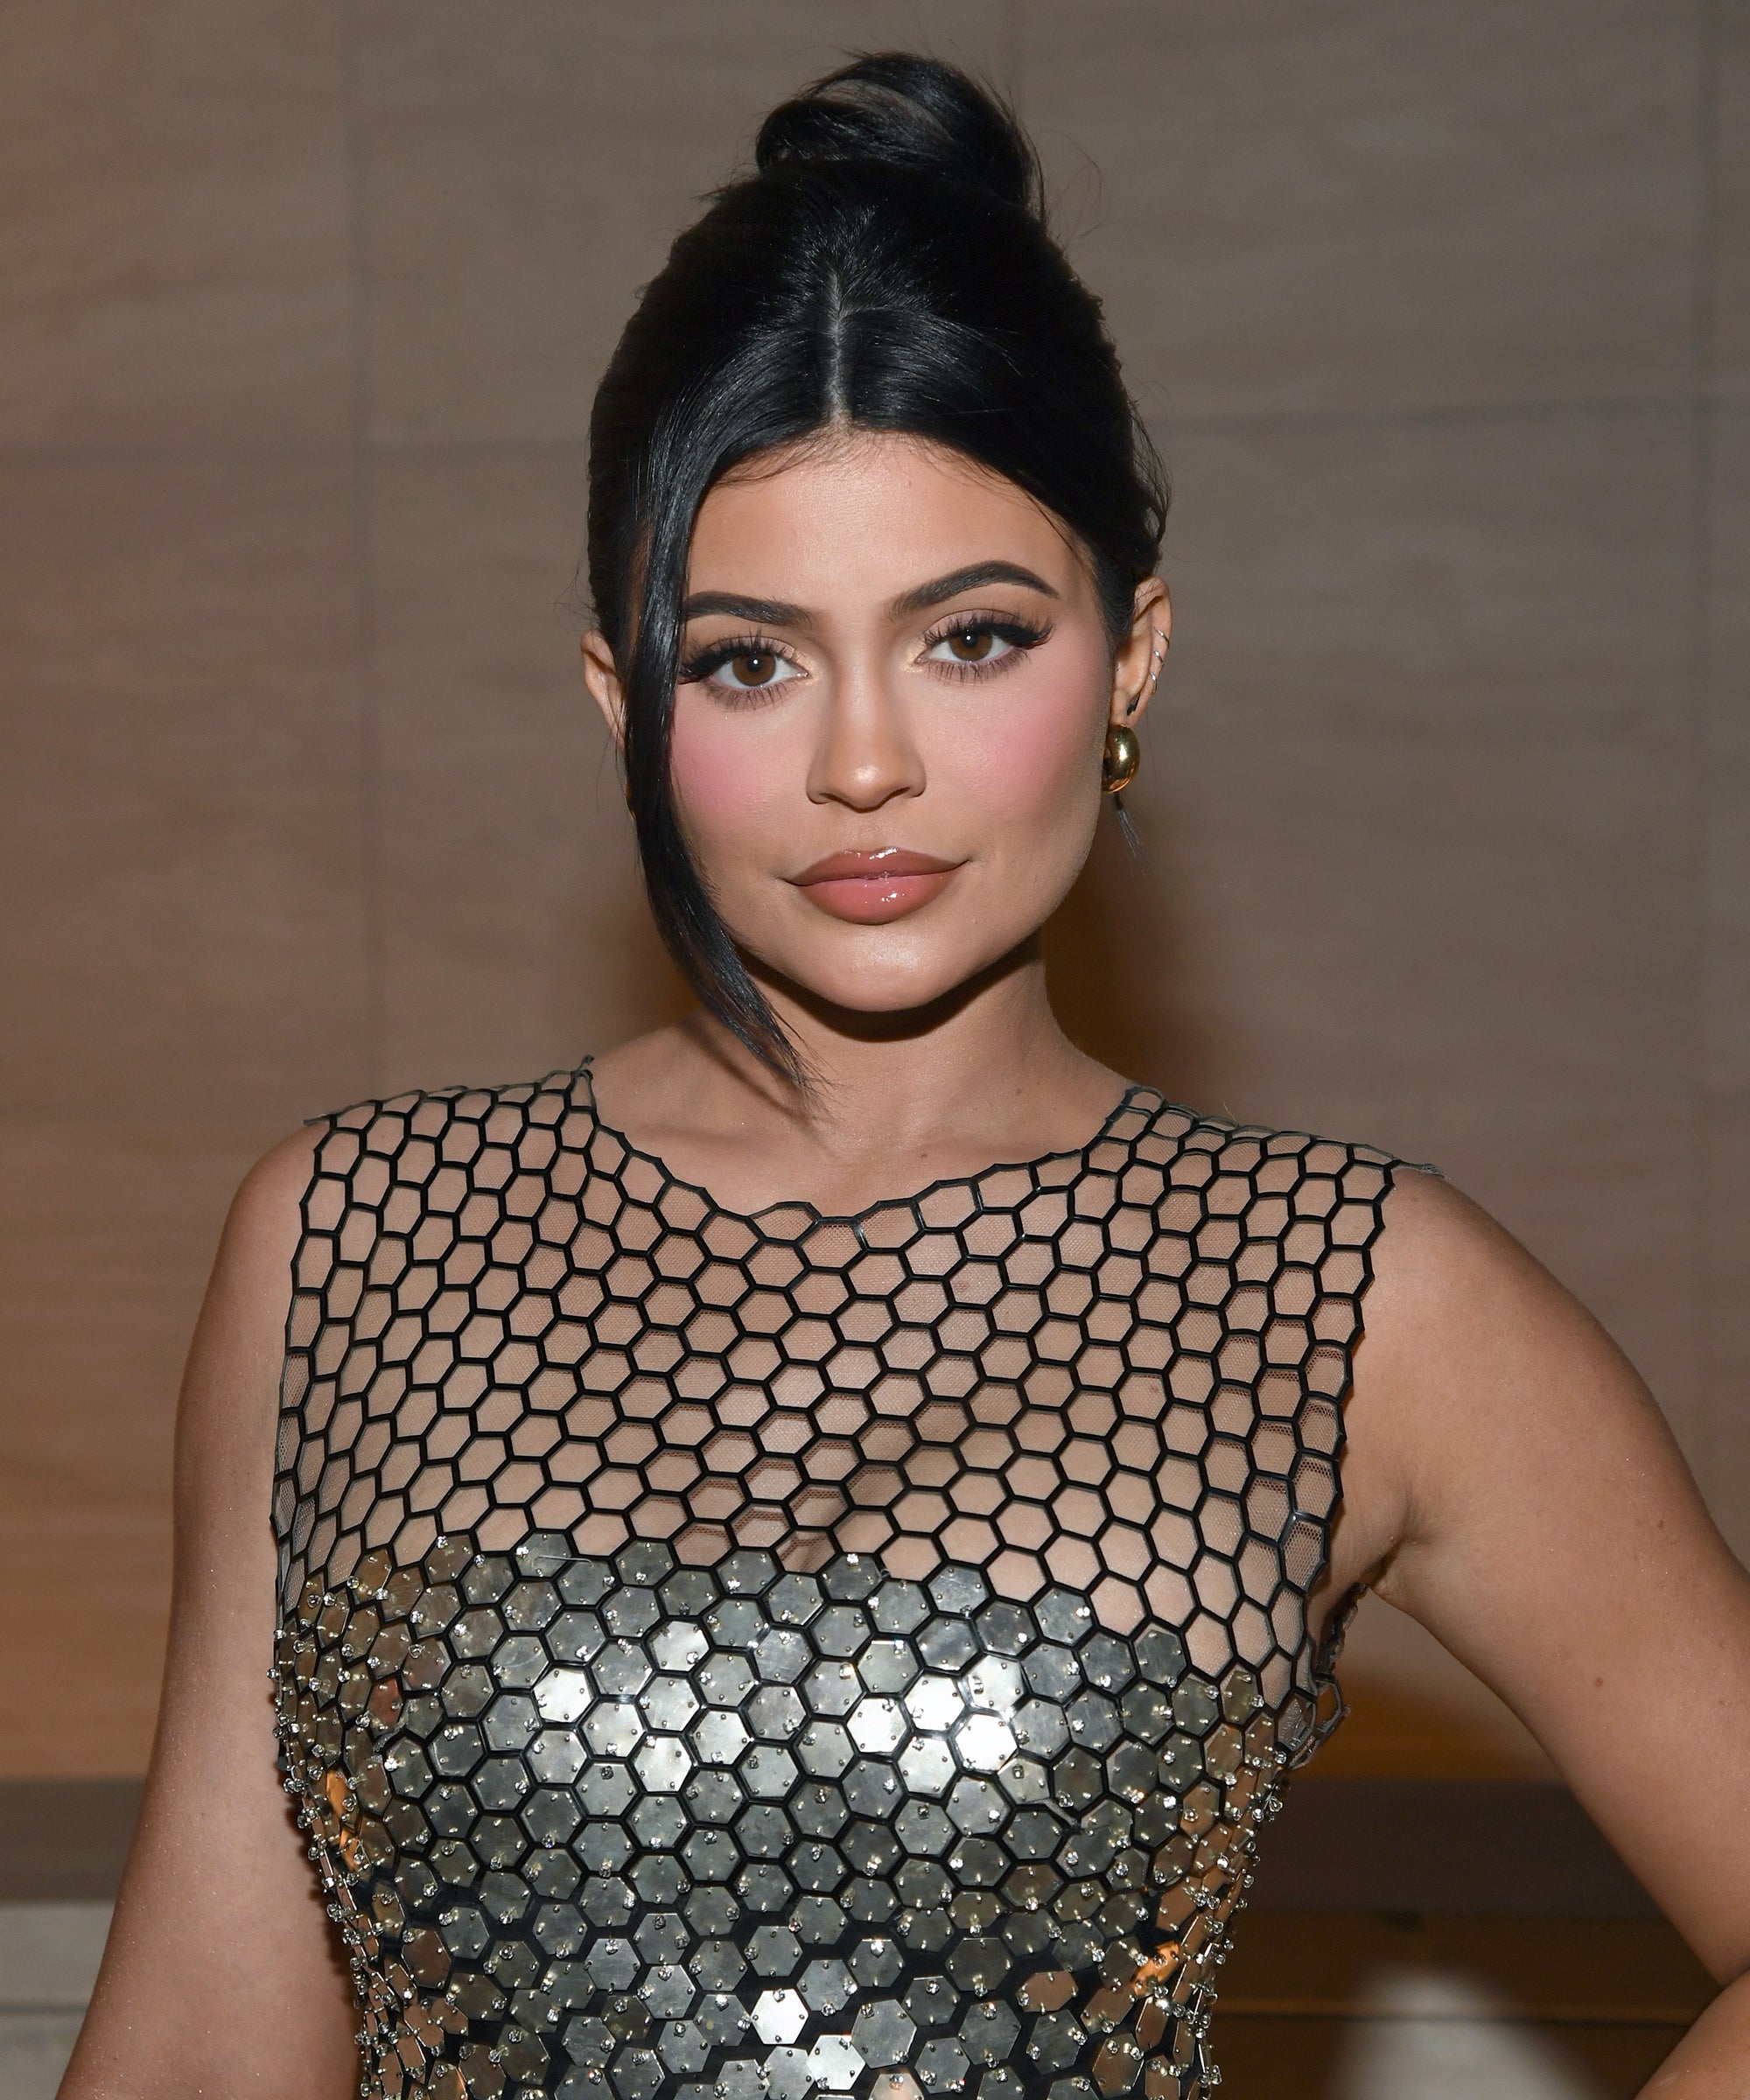 Kylie Jenner Goes Au Naturale with Her Latest Look